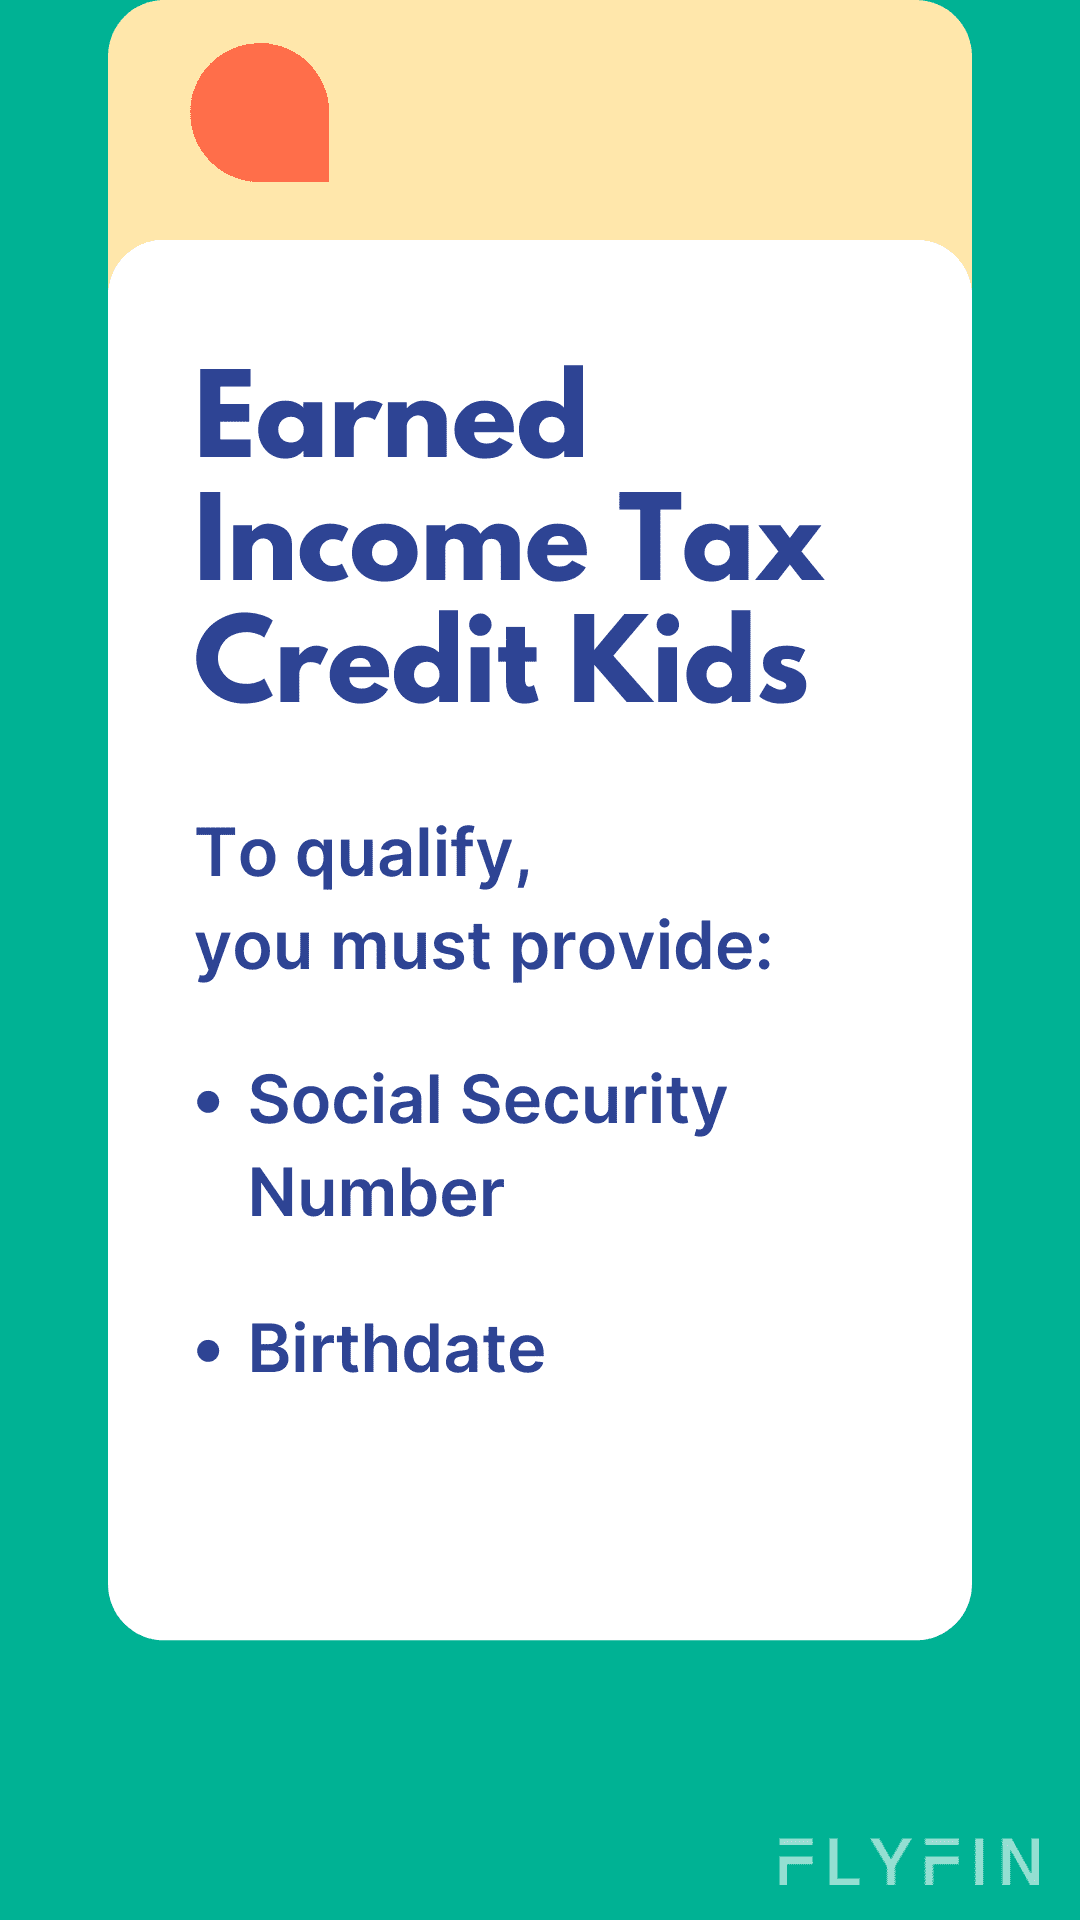 Qualifications for a tax filer's child to receive the Earned Income Credit